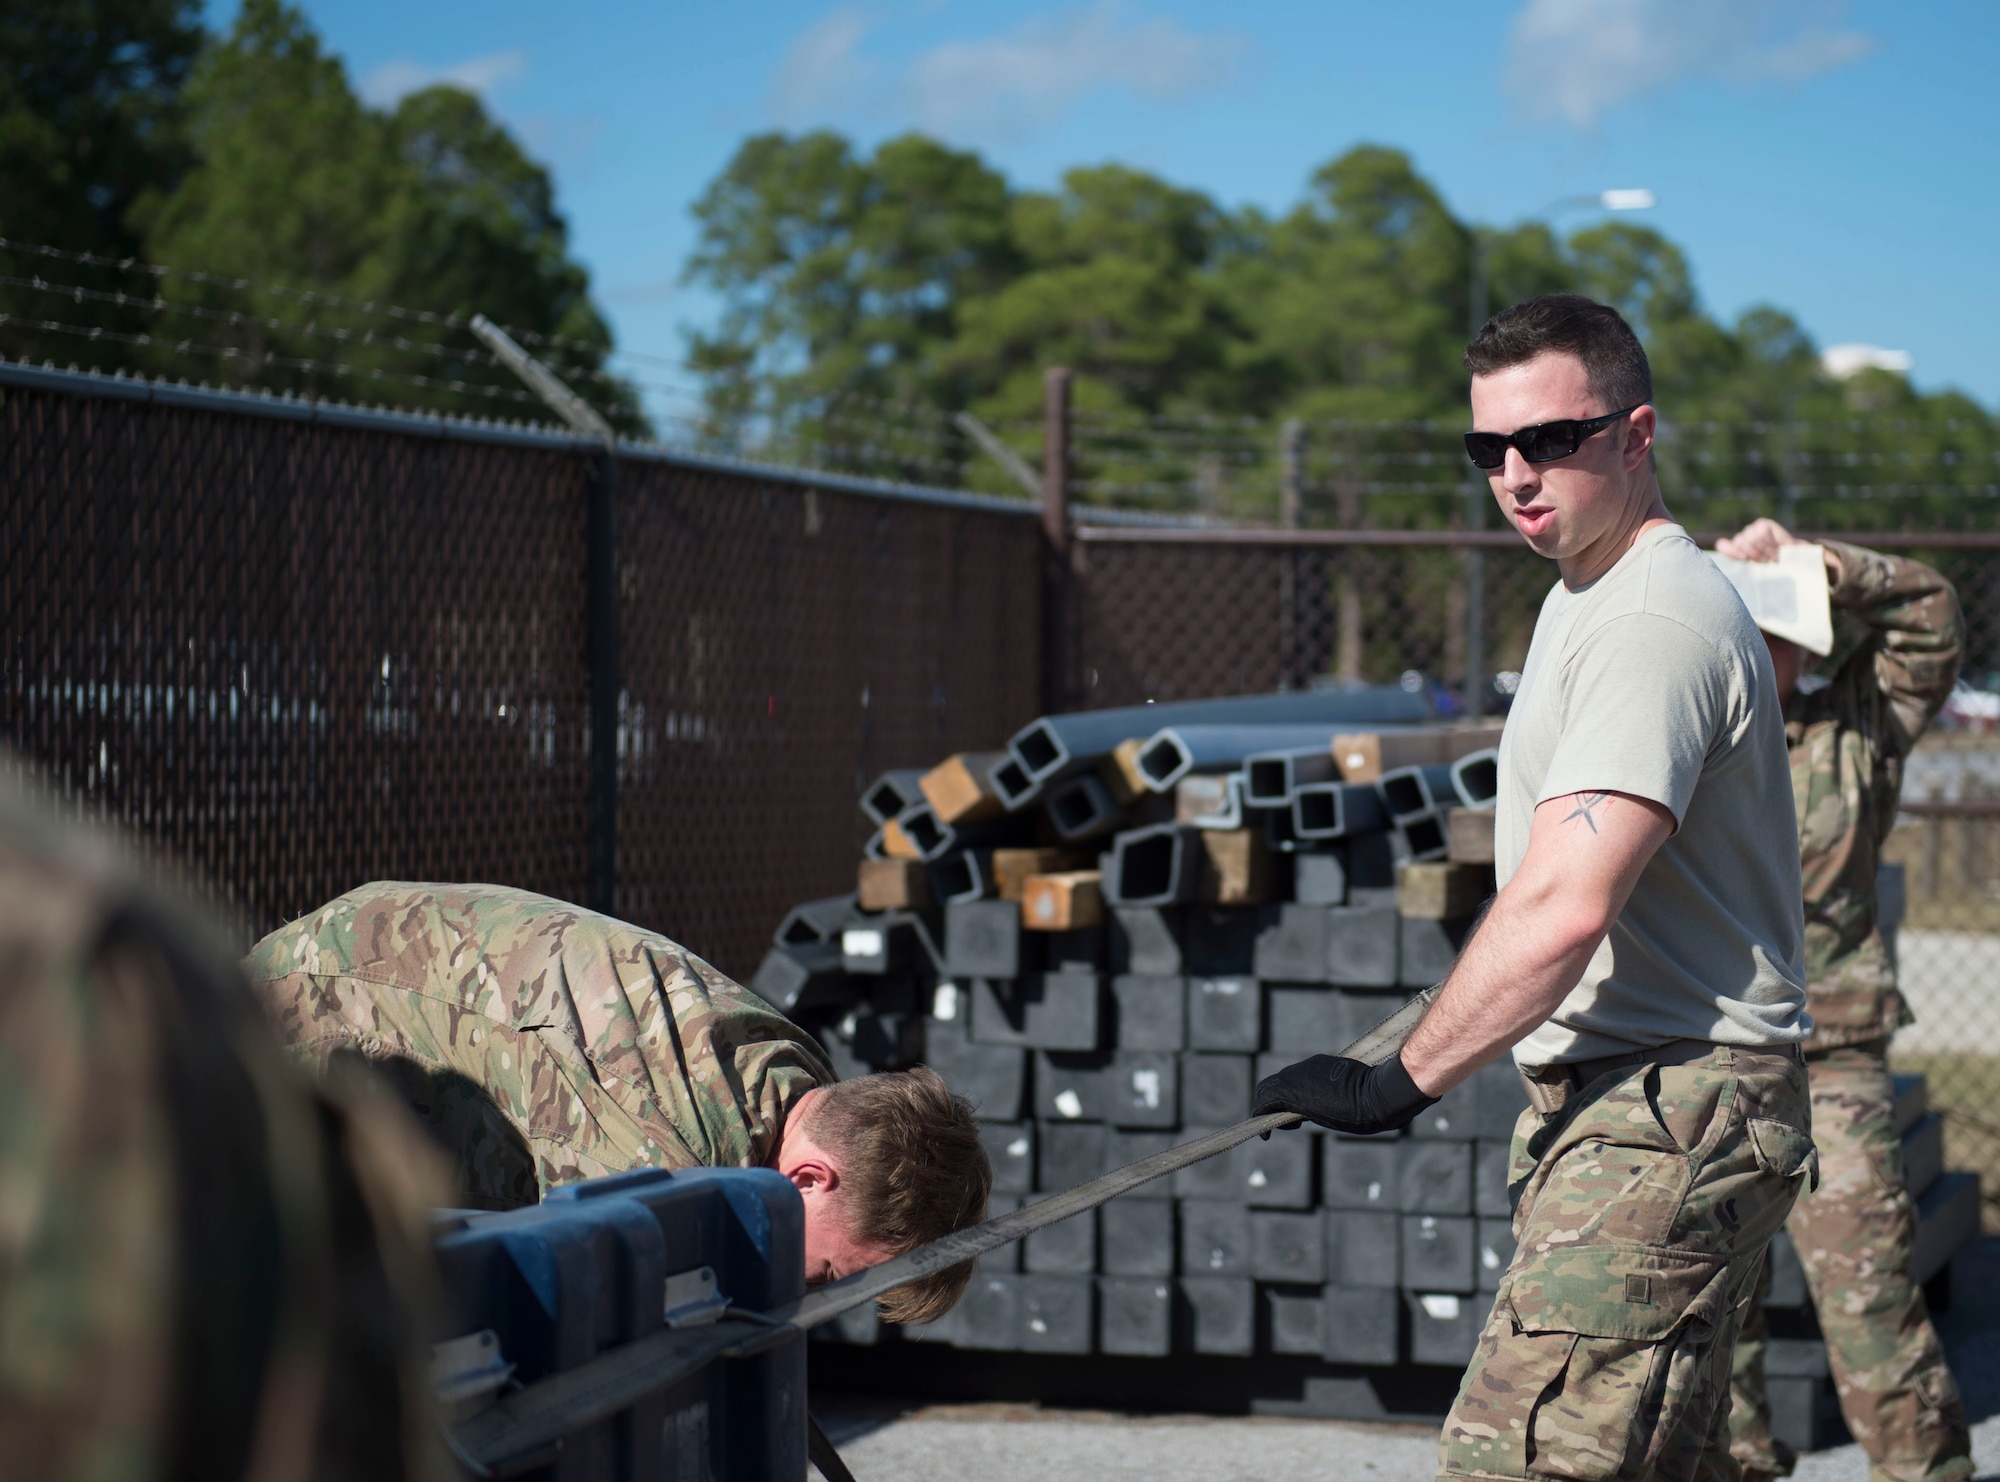 Staff Sgt. Jerred Brown, an aircrew flight equipment craftsman with the 34th Special Operations Squadron, straps down cargo during pallet build-up training at Hurlburt Field, Fla., Dec. 12, 2016. AFE Air Commandos were trained how to properly document and load cargo onto aircraft, ensuring readiness to execute global special operations. (U.S. Air Force photo by Senior Airman Krystal M. Garrett)